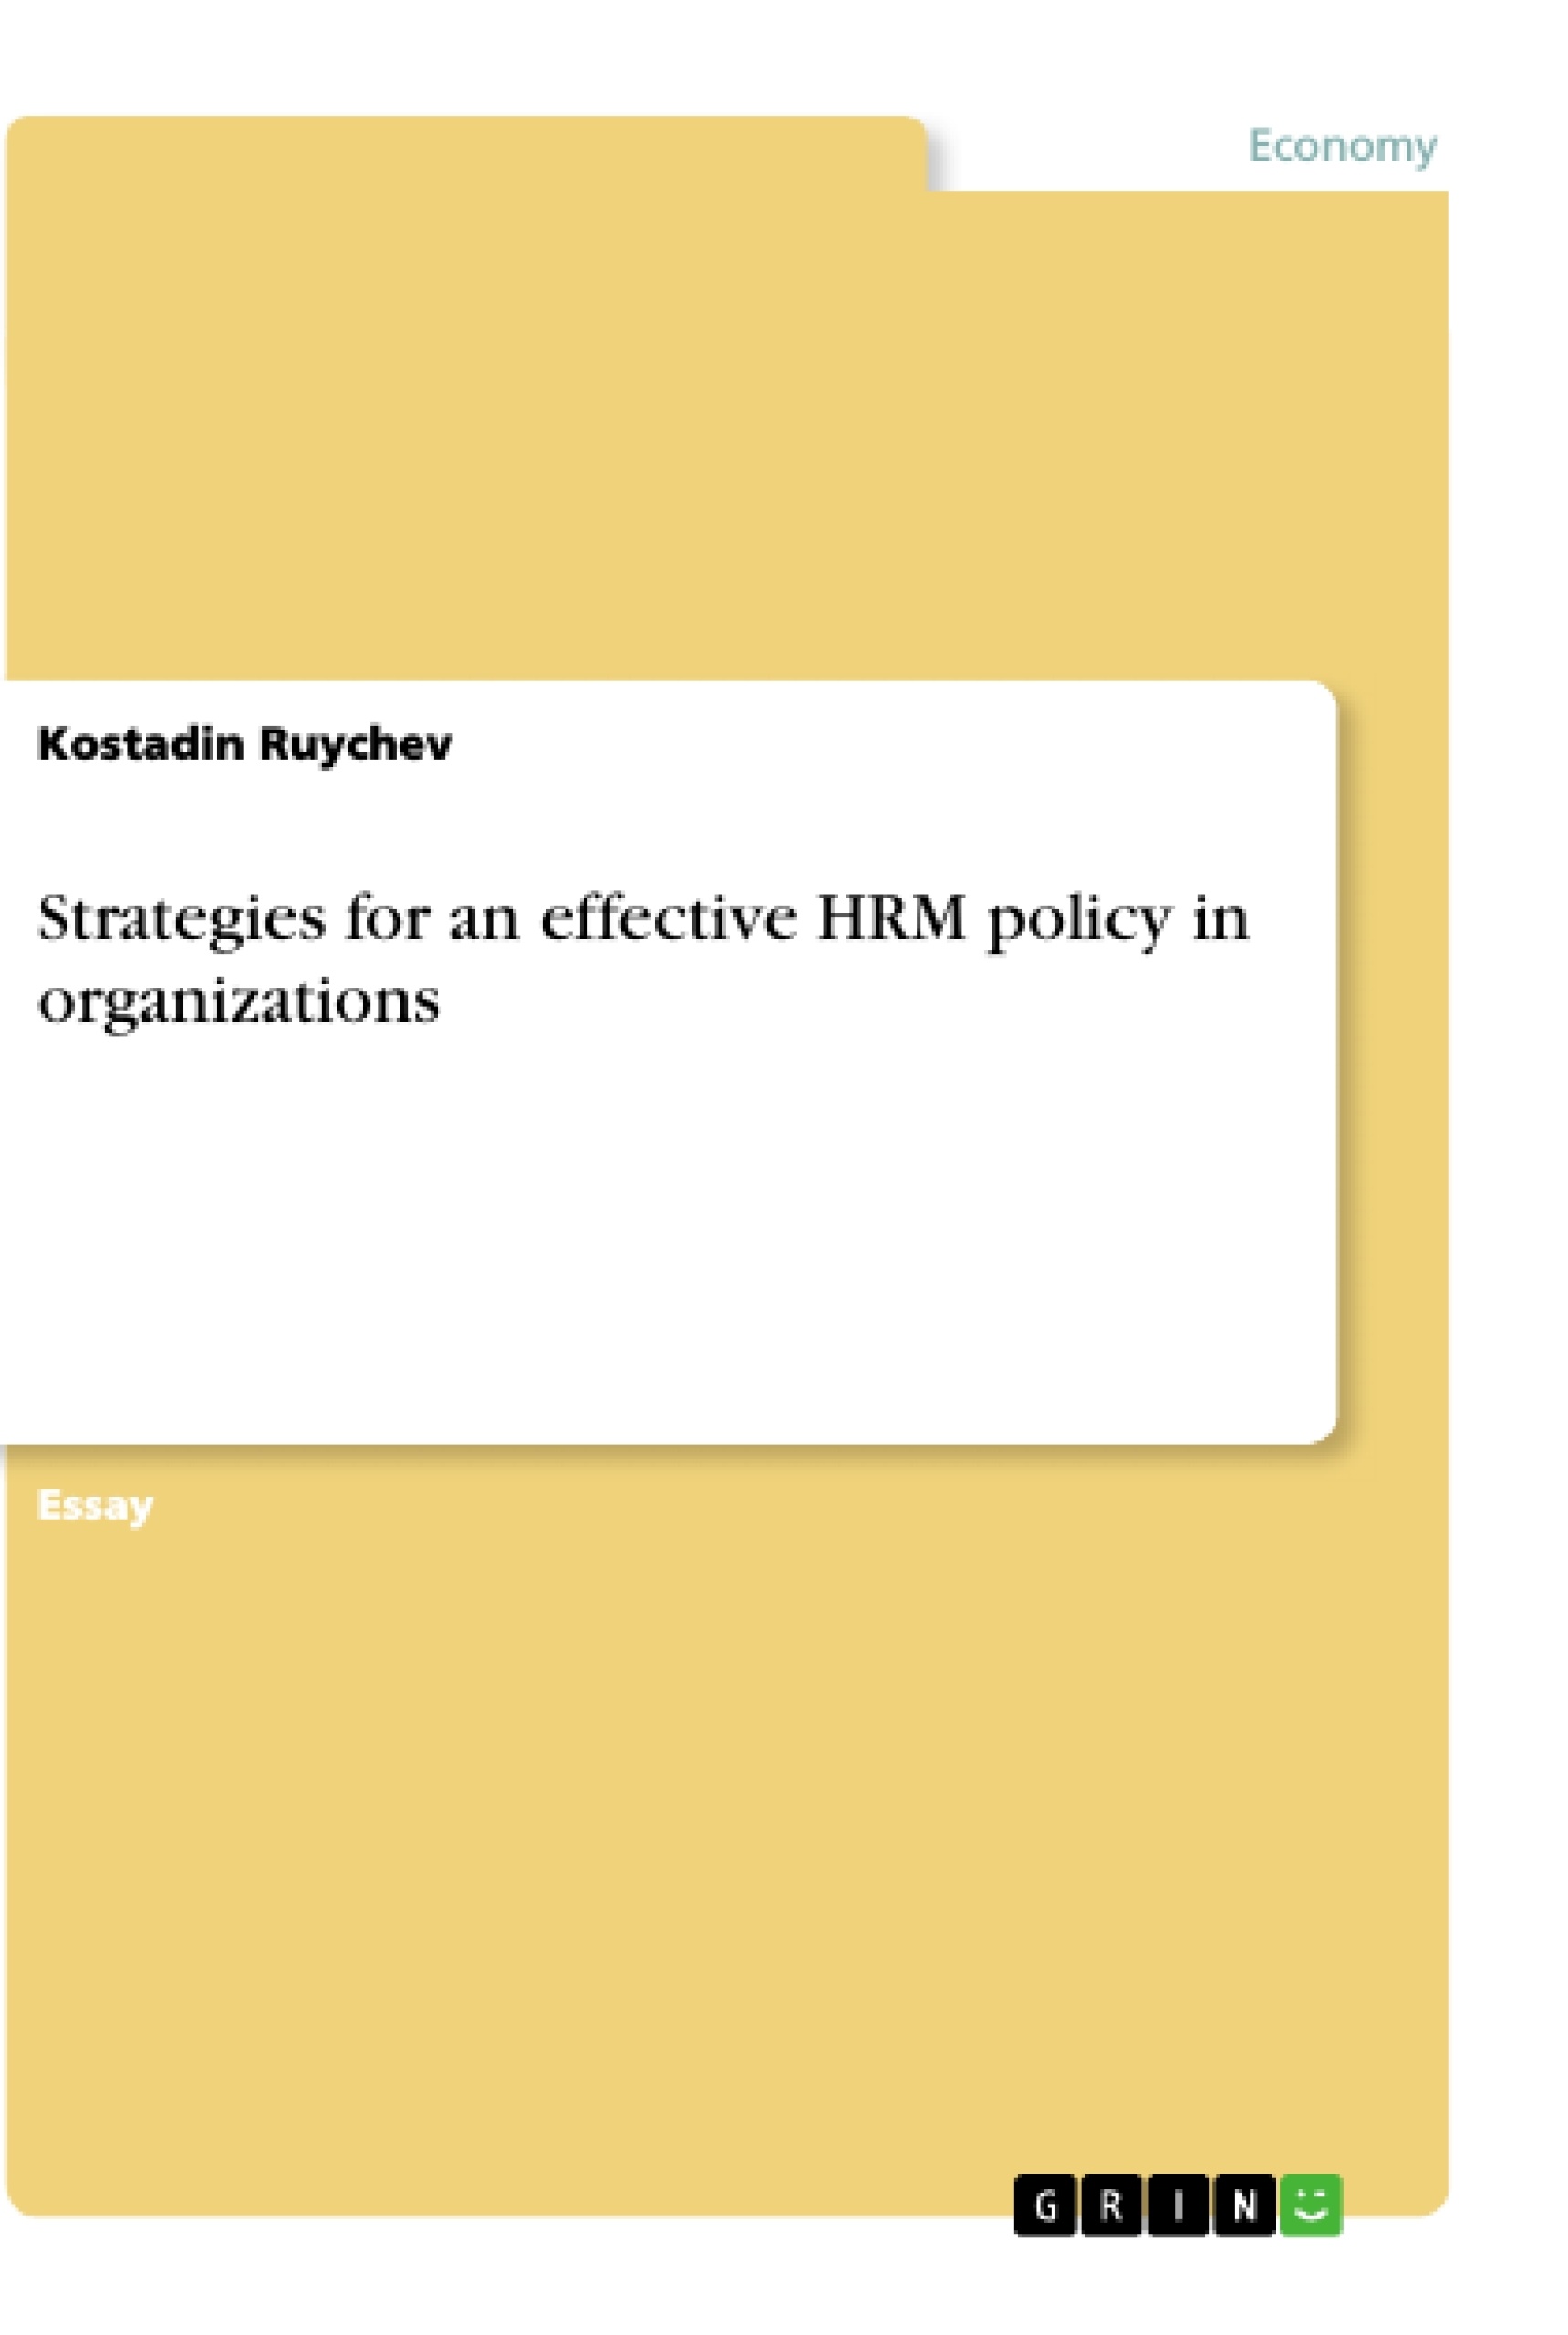 Título: Strategies for an effective HRM policy in organizations